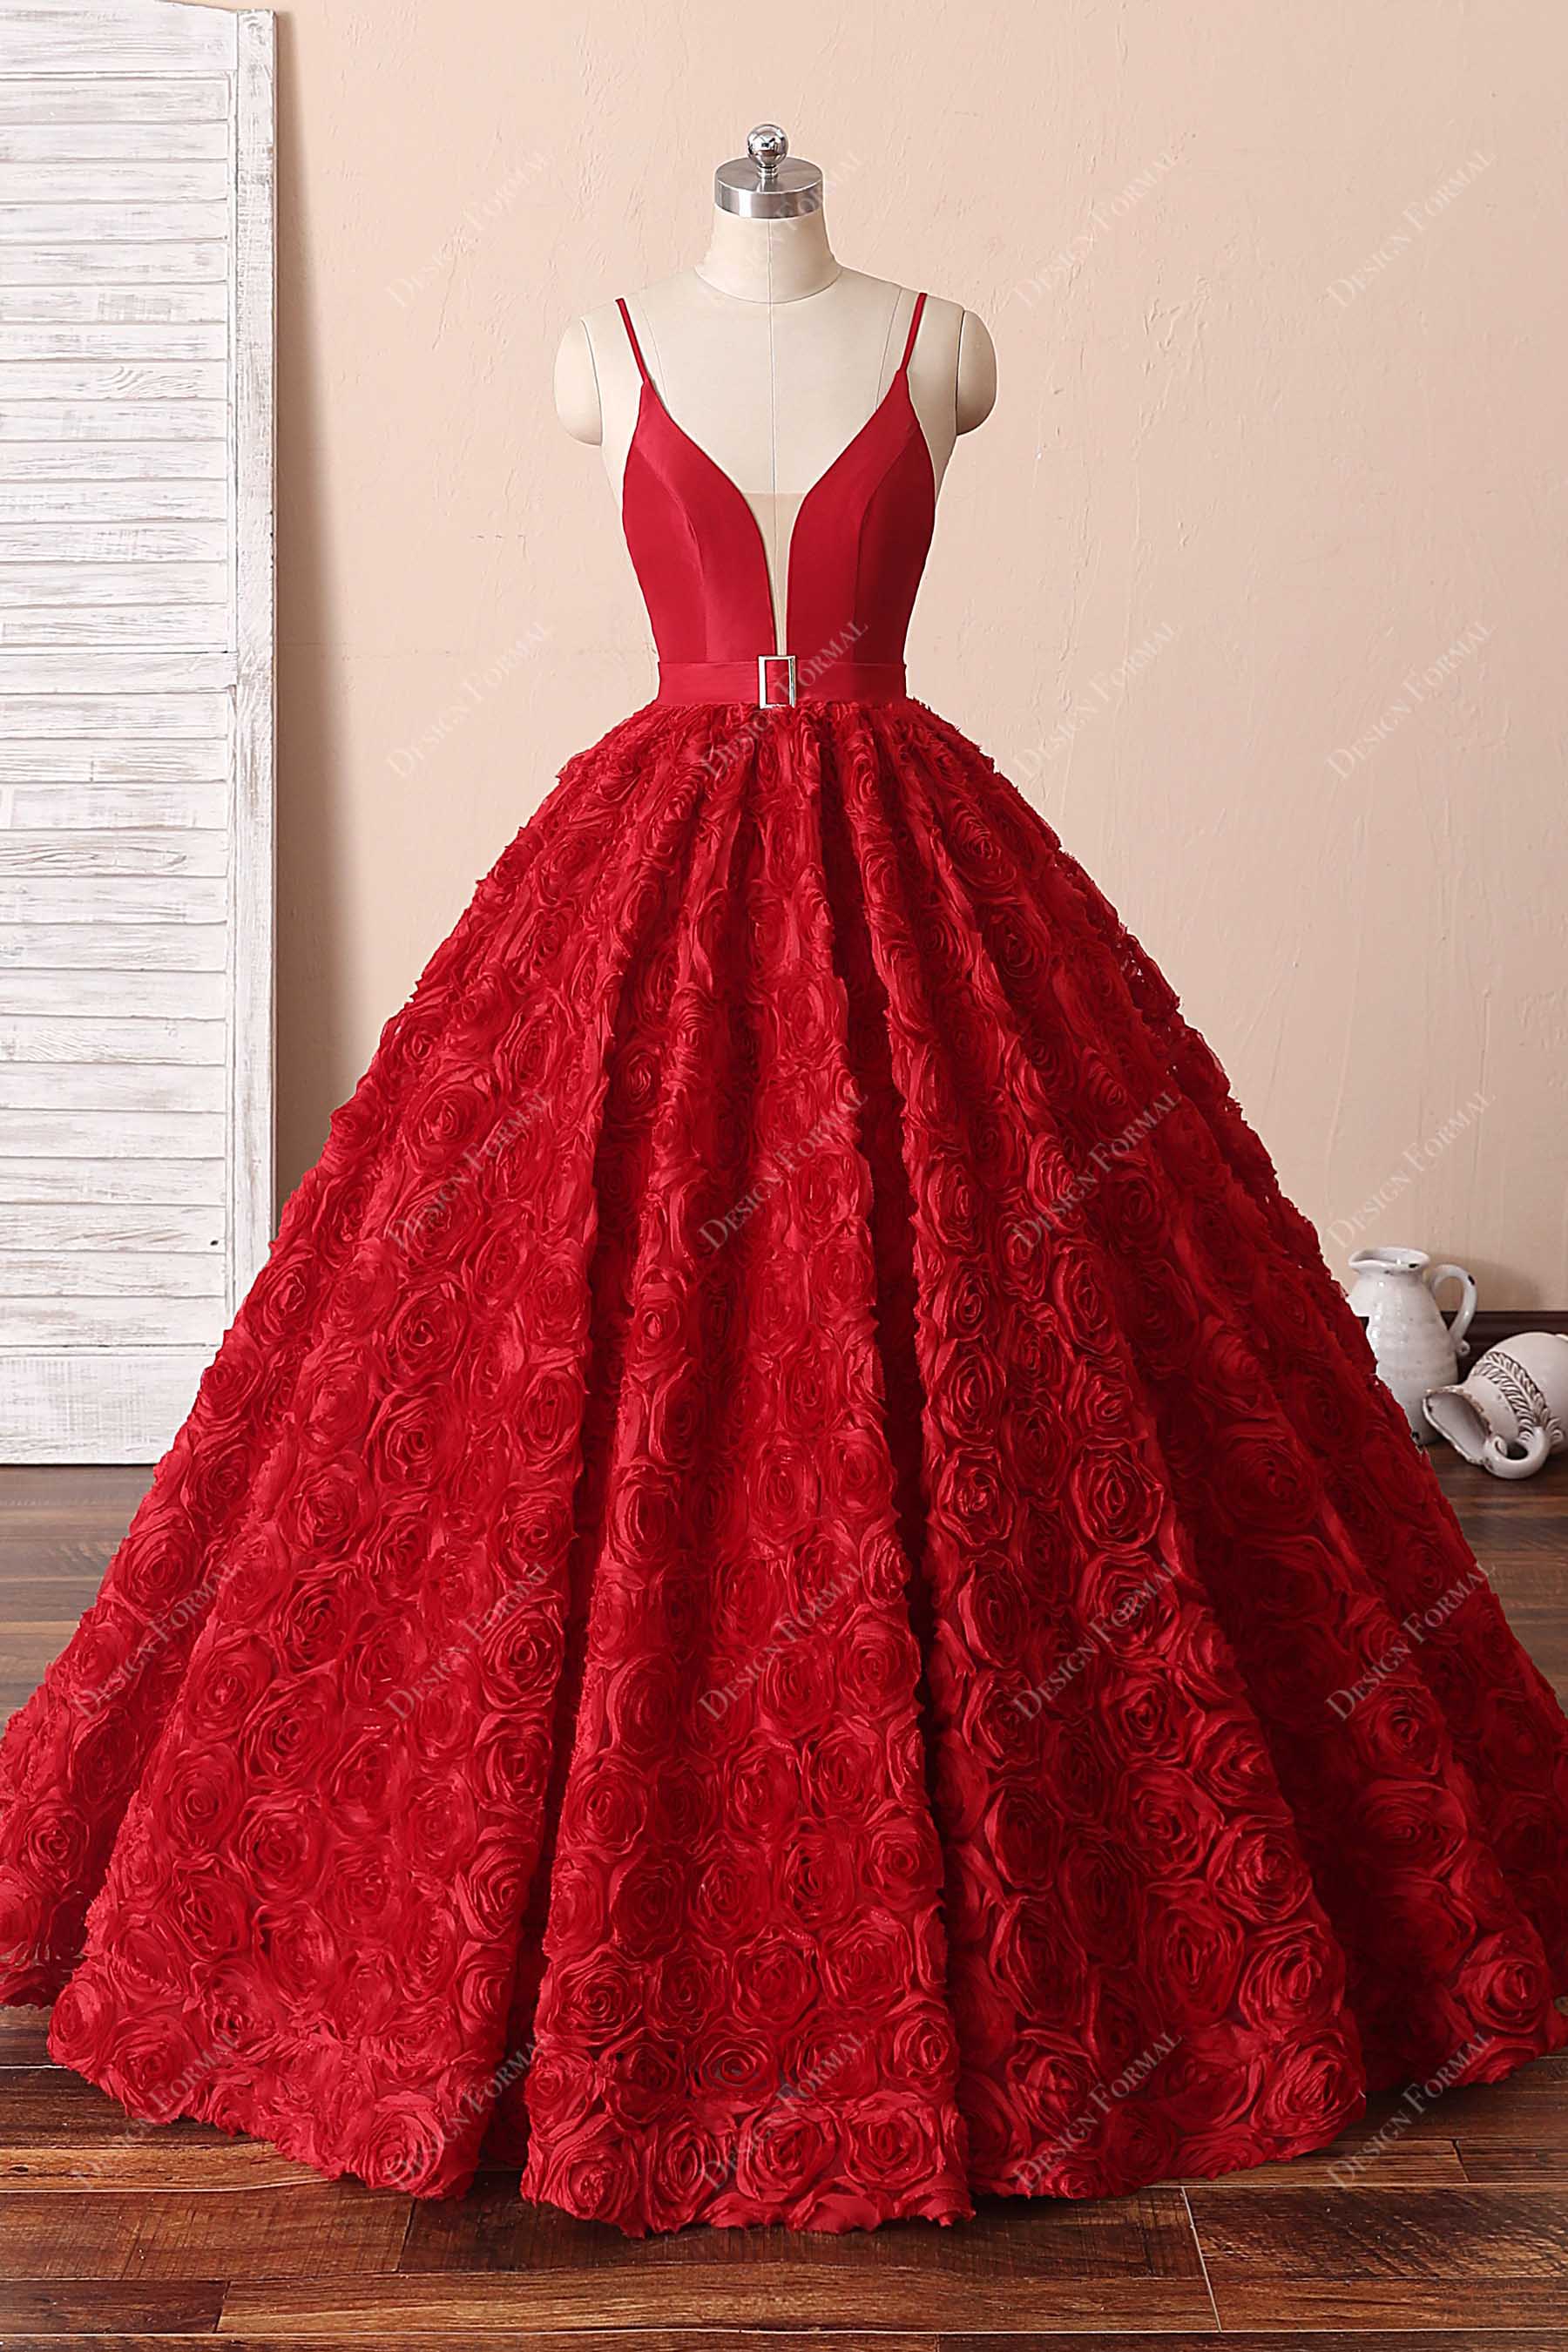 Plunging Neck Red 3D Rose Princess Ball Gown Prom Dress